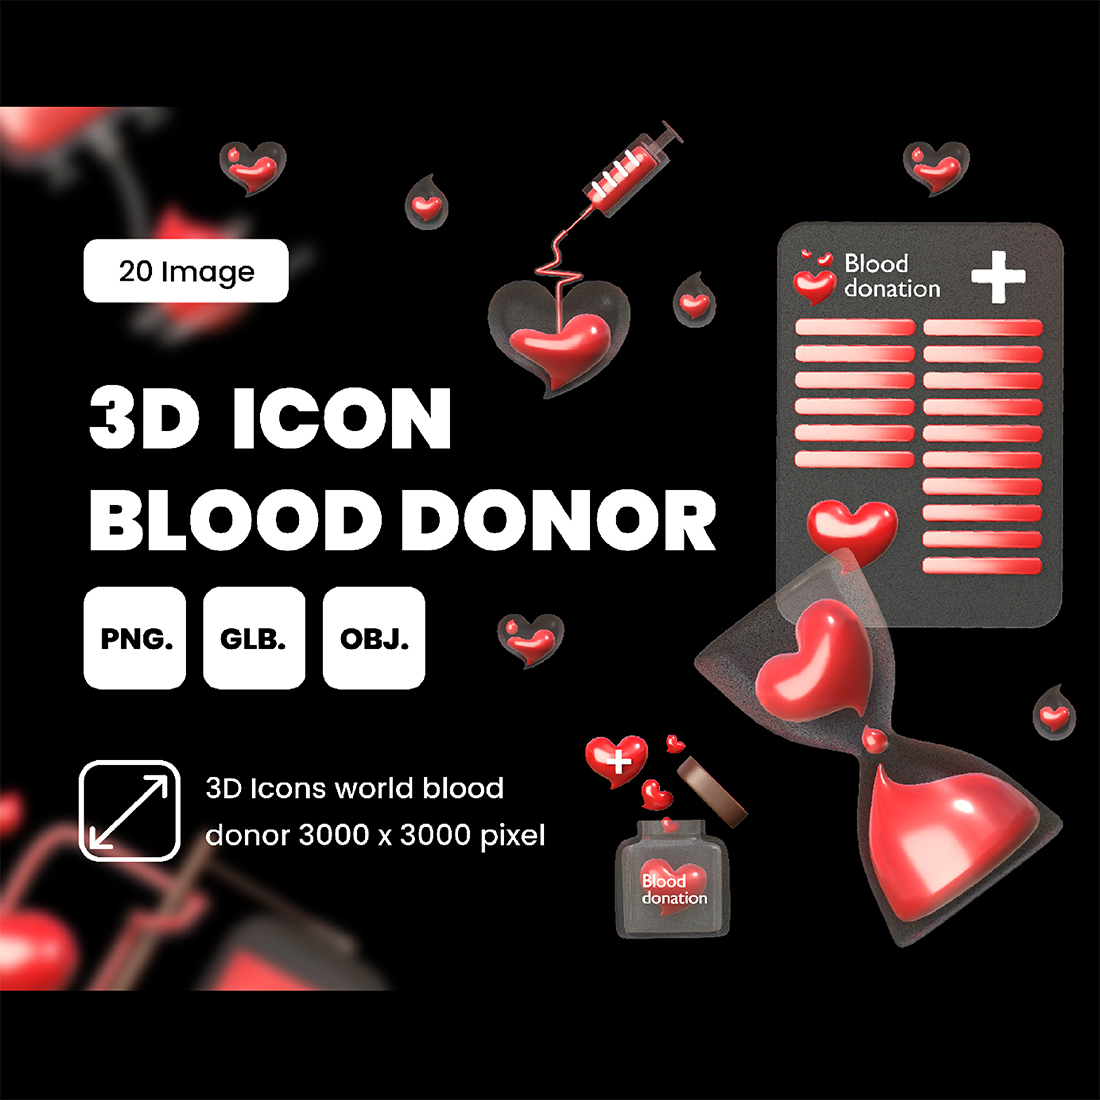 3d icon blood donor preview image.